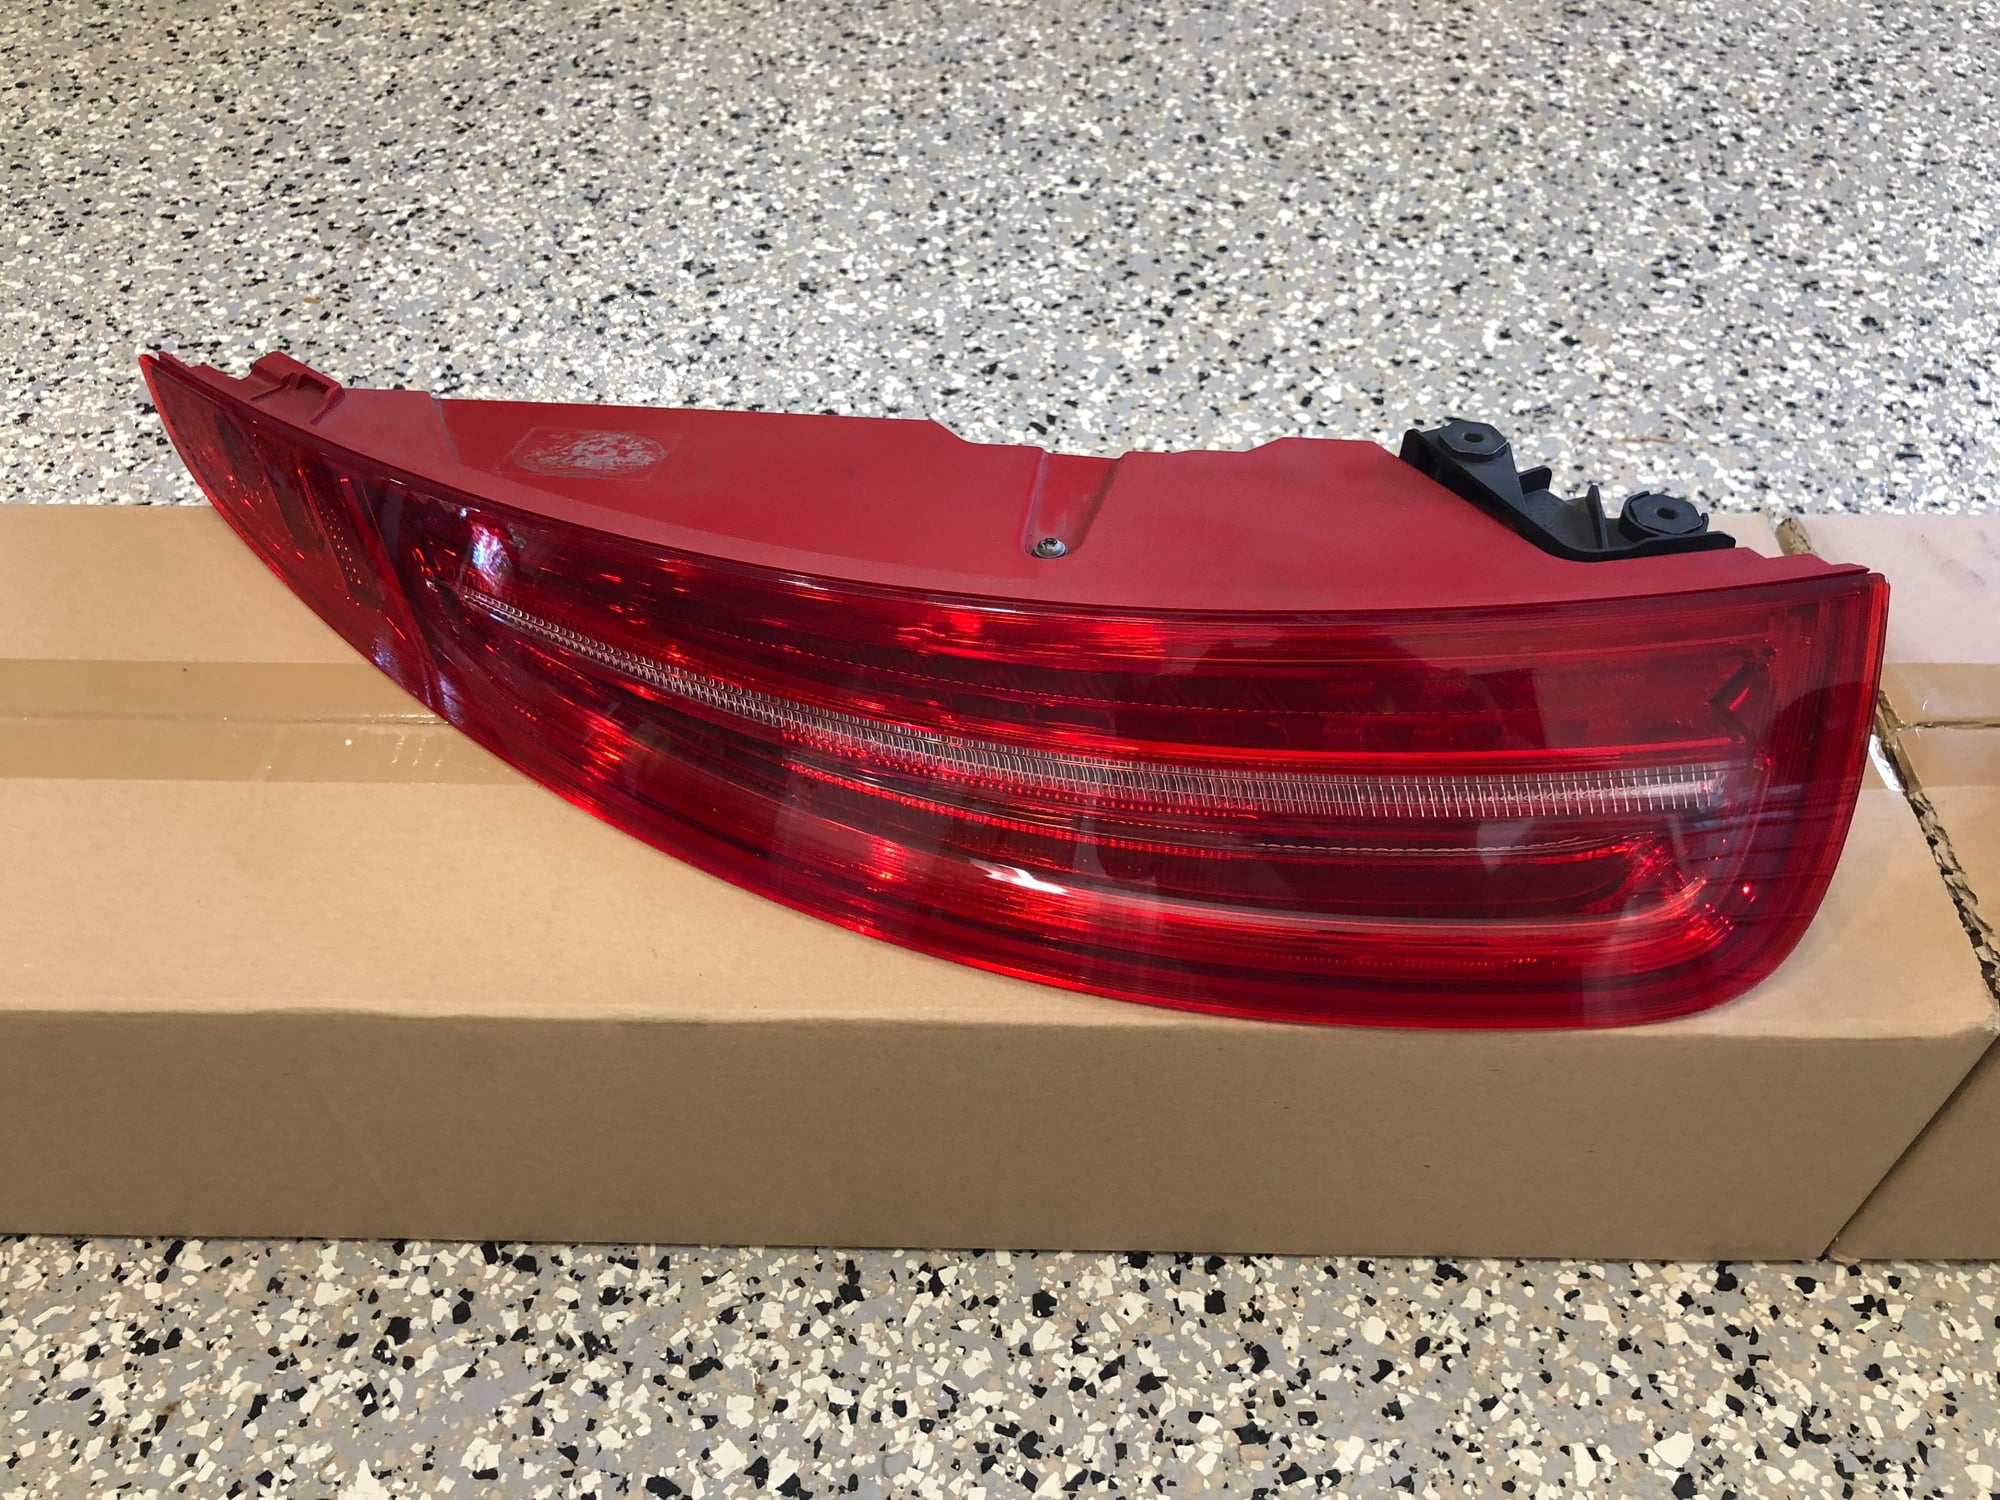 Lights - 991.1 Tail Lights - Red - Used - 2013 to 2016 Porsche 911 - San Francisco, CA 94111, United States